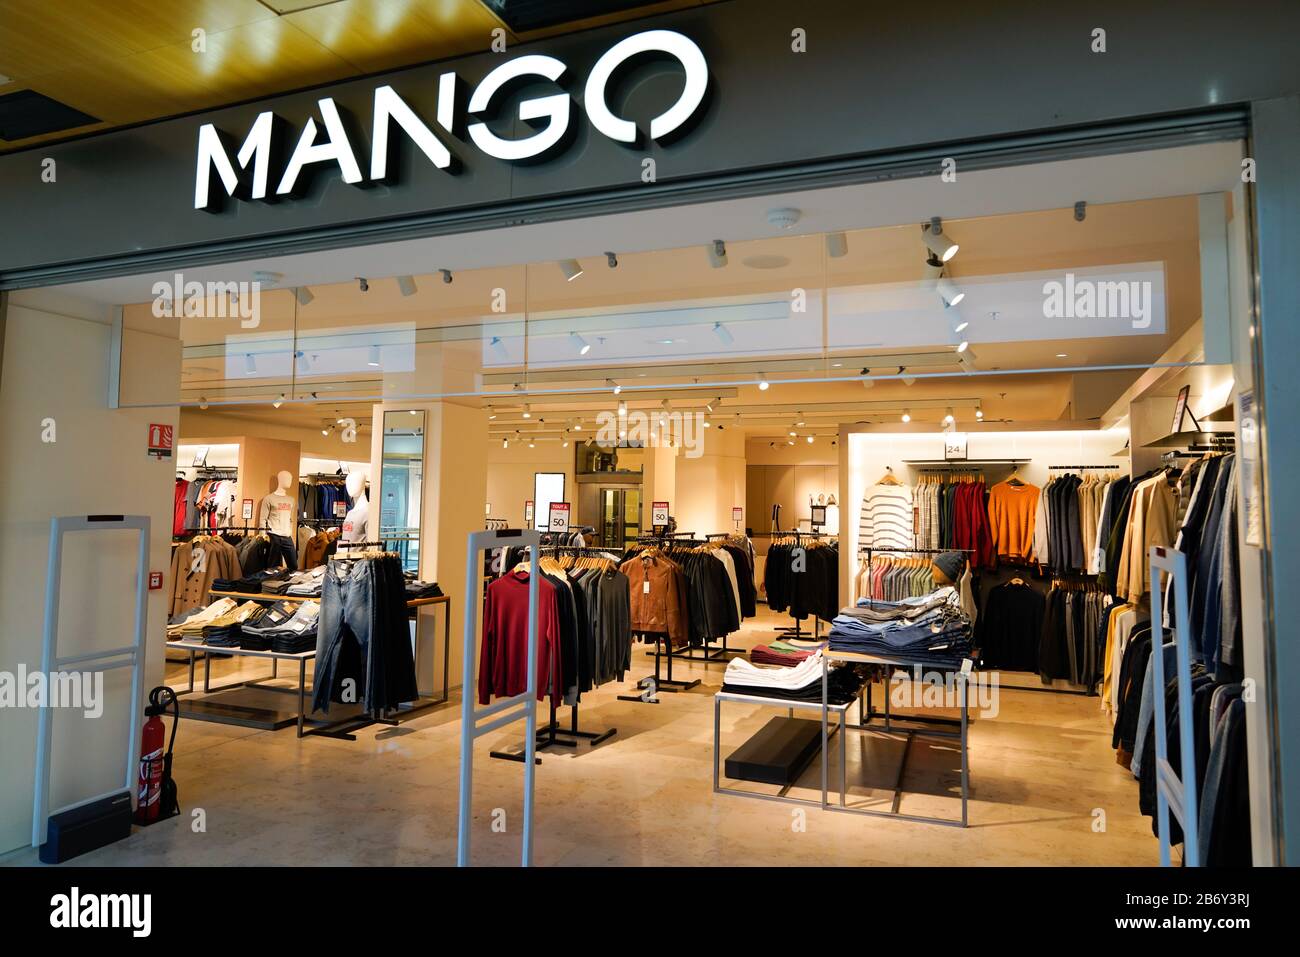 Bordeaux , Aquitaine / France - 01 22 2020 : Mango logo Spanish clothes  store shop front sign in mall street Stock Photo - Alamy